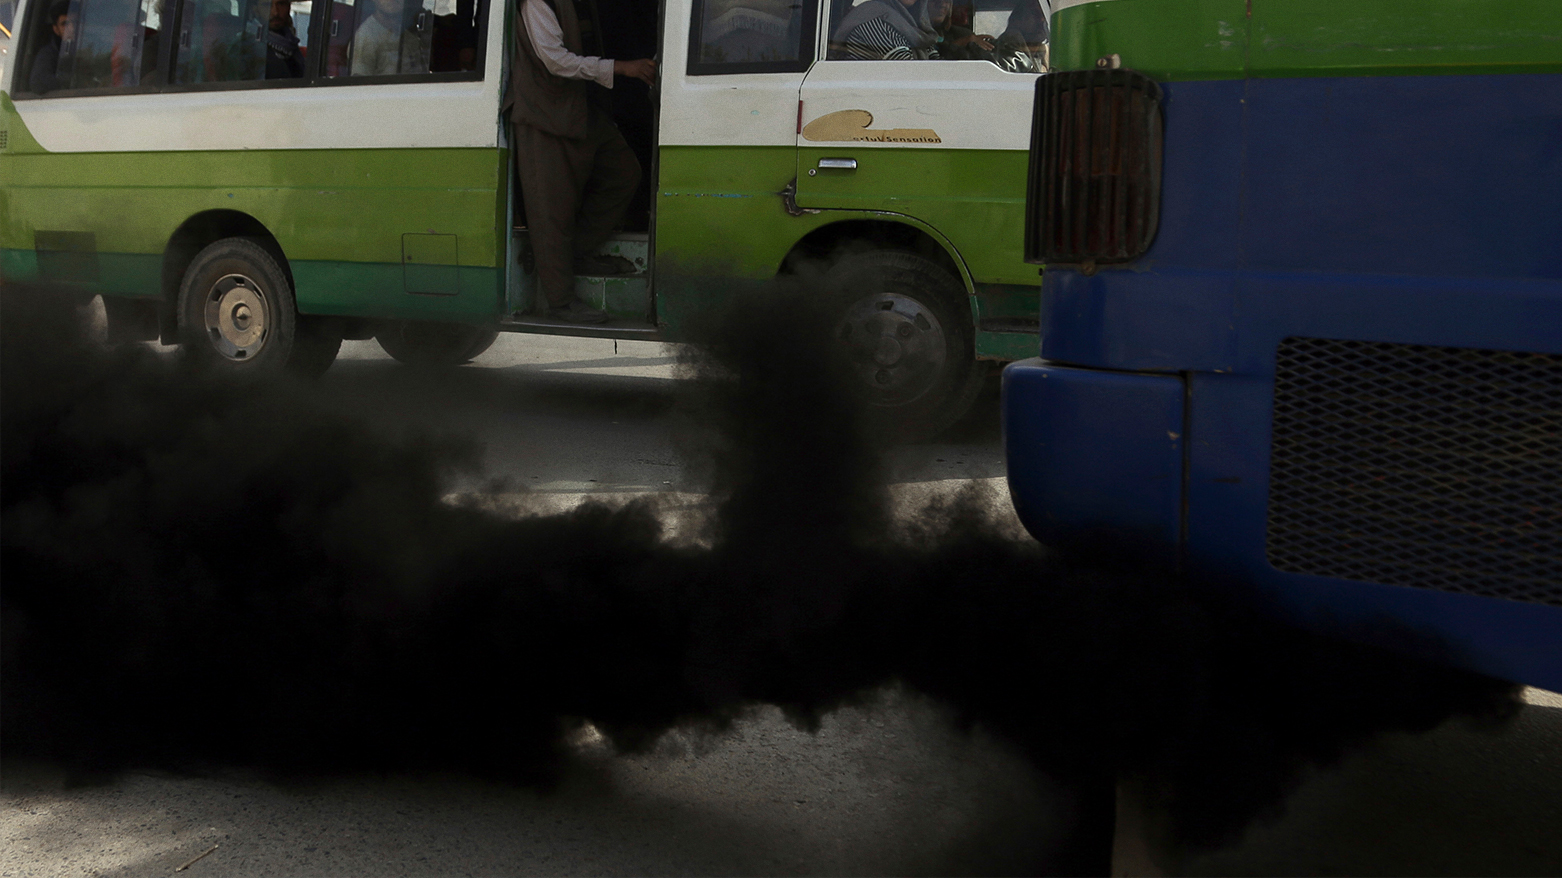 Smoke comes out from the exhaust pipe of an old mini-bus. (Photo: AP)